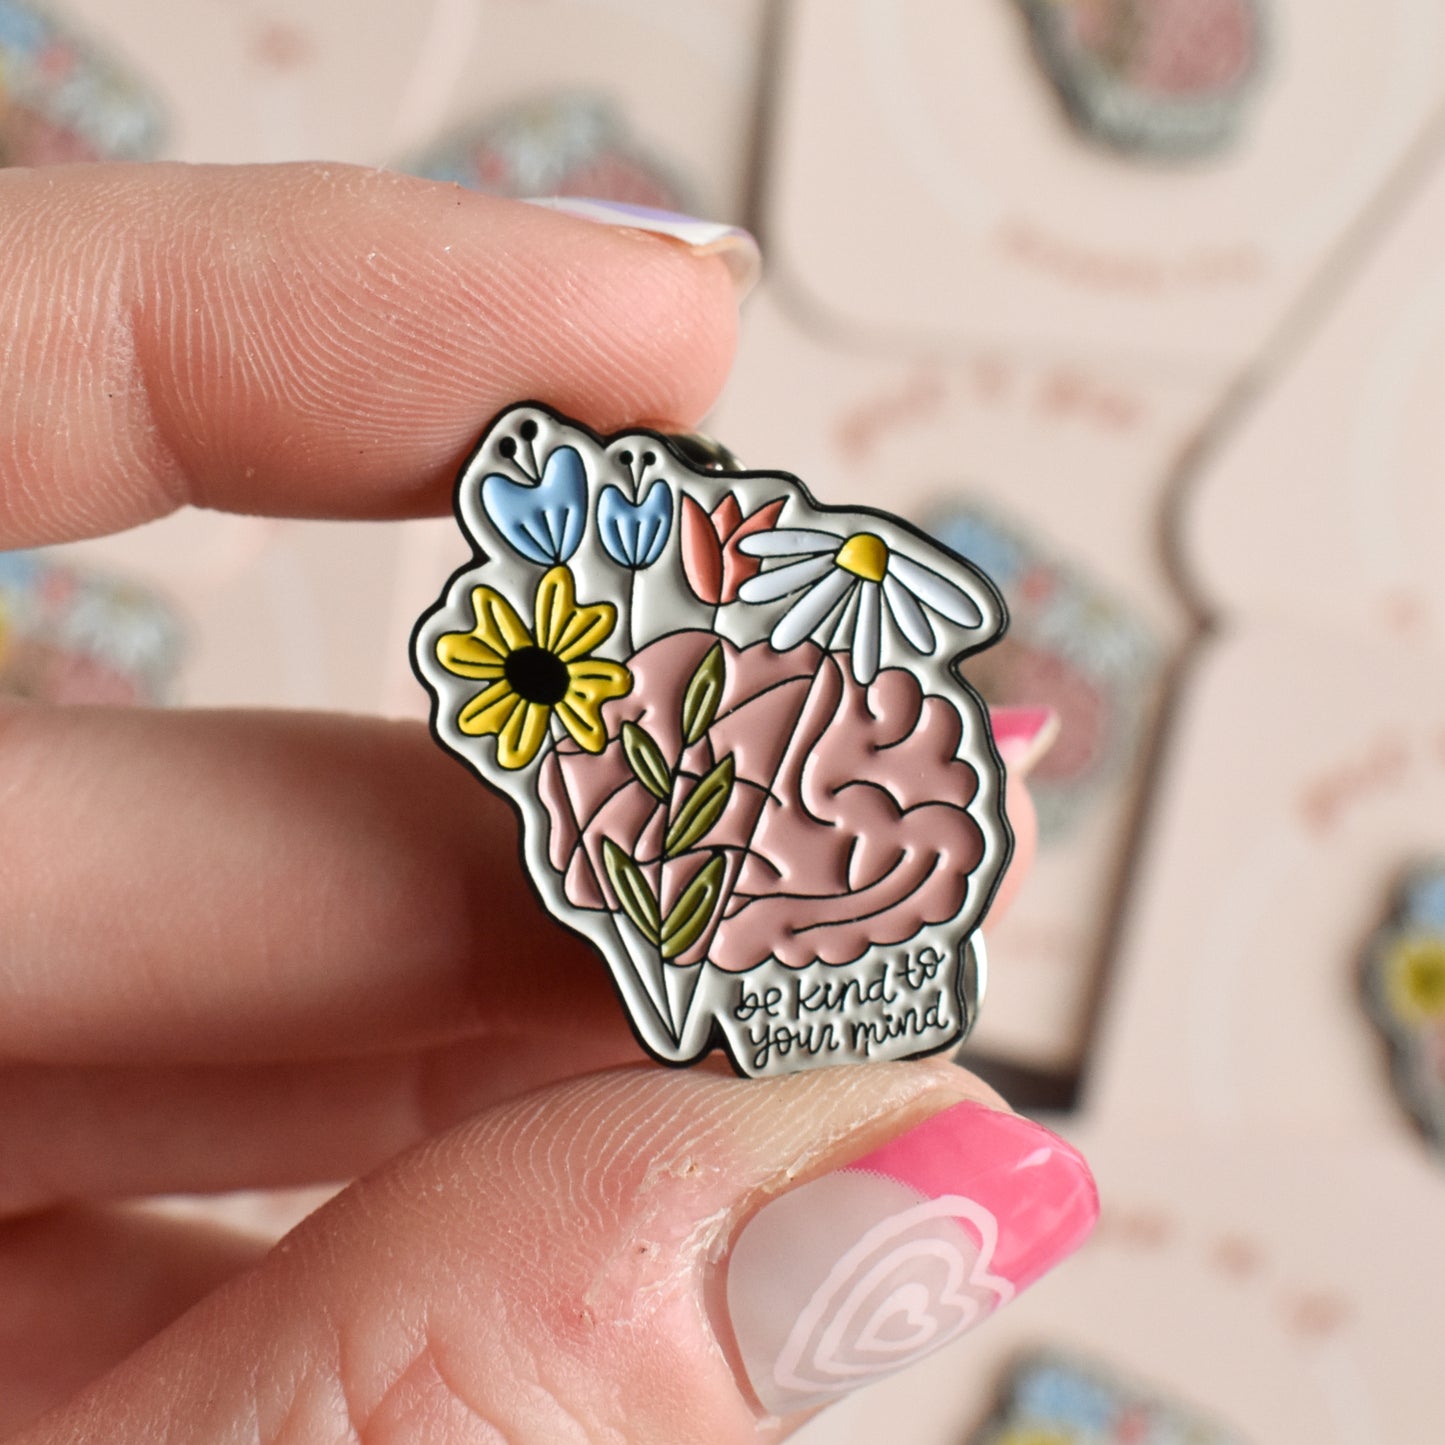 Be Kind To Your Mind Pin